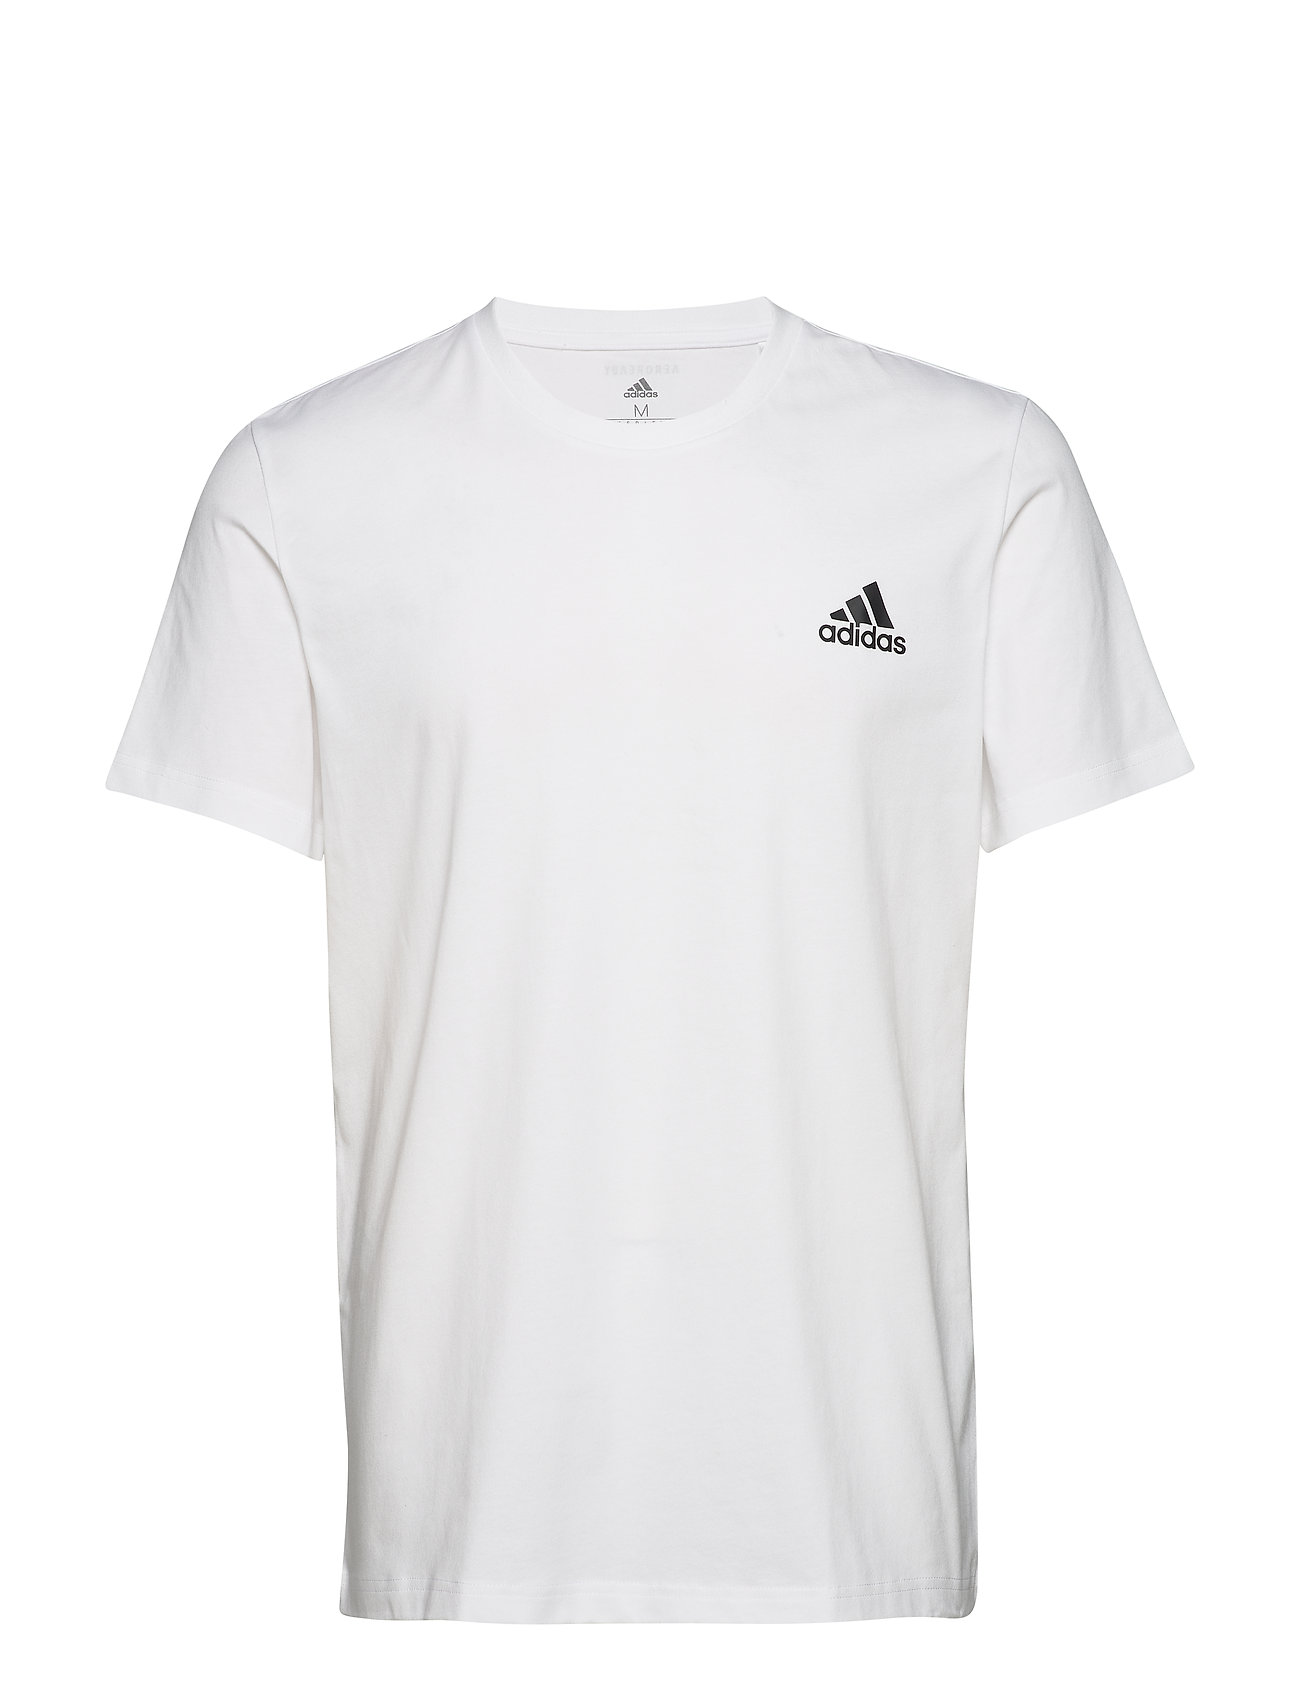 adidas outlet tennis